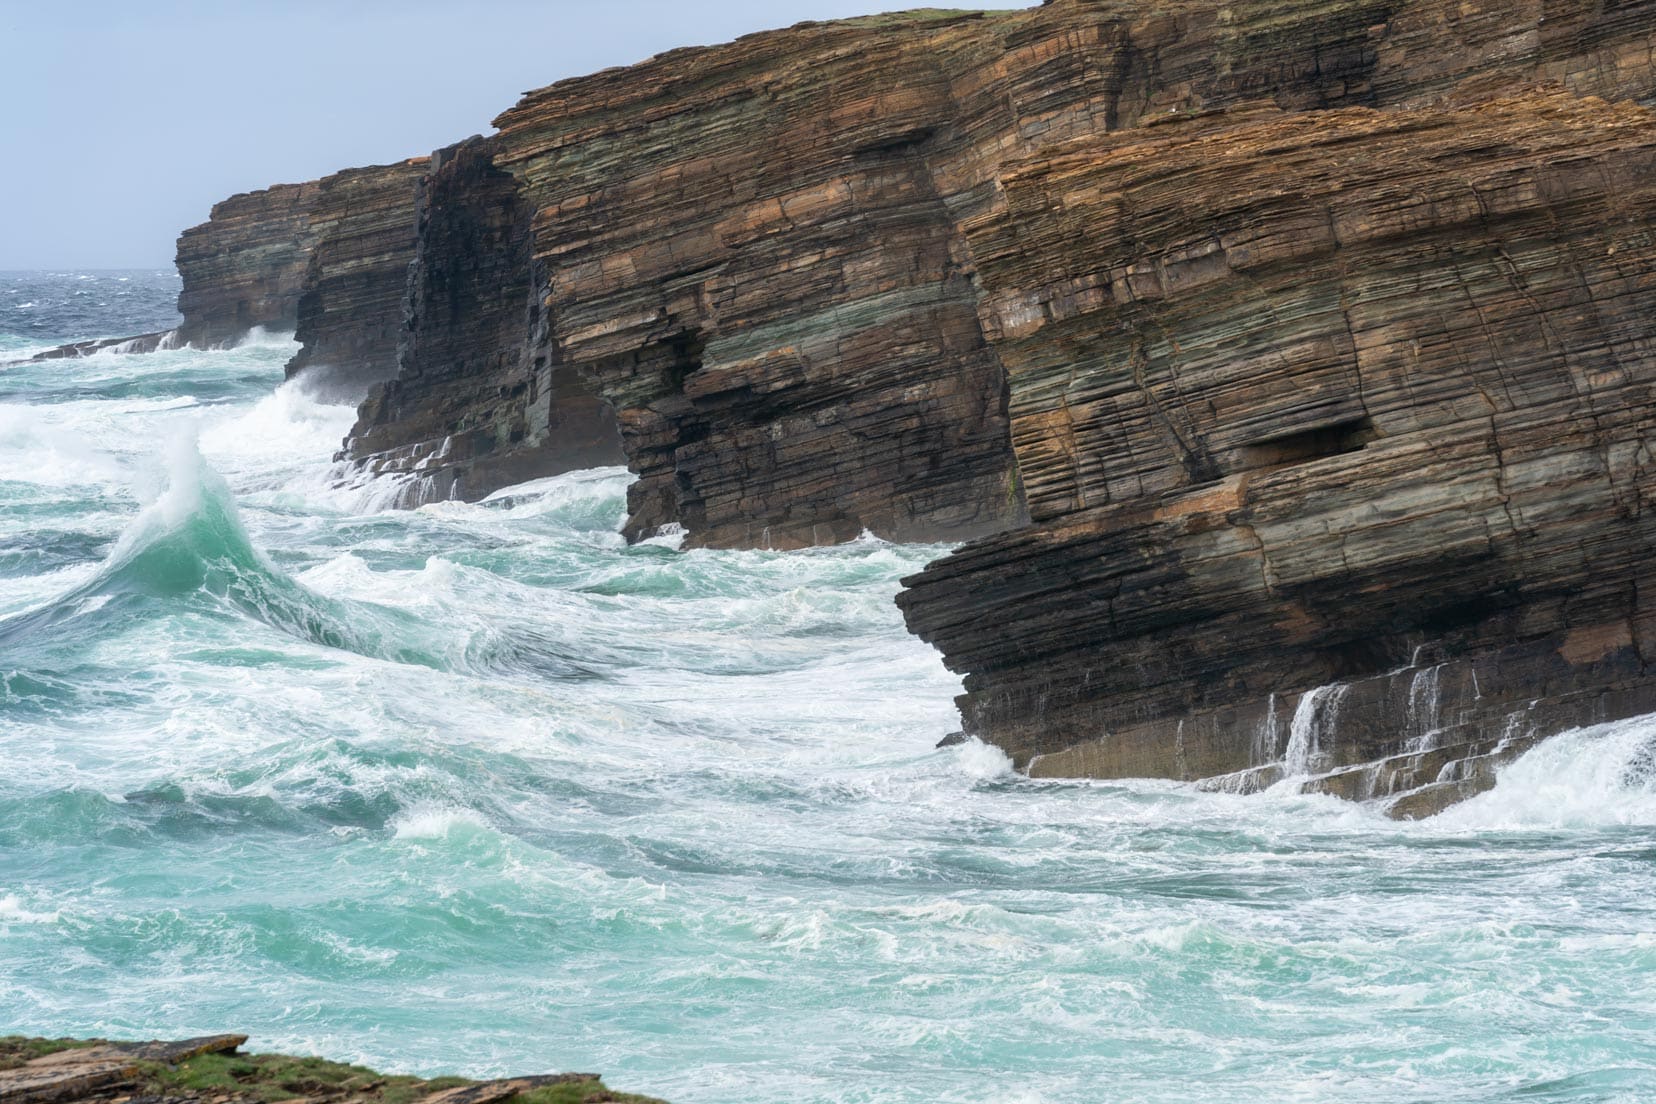 Wild ocean and waves up against rocks at Yesnaby stacks in Orkney